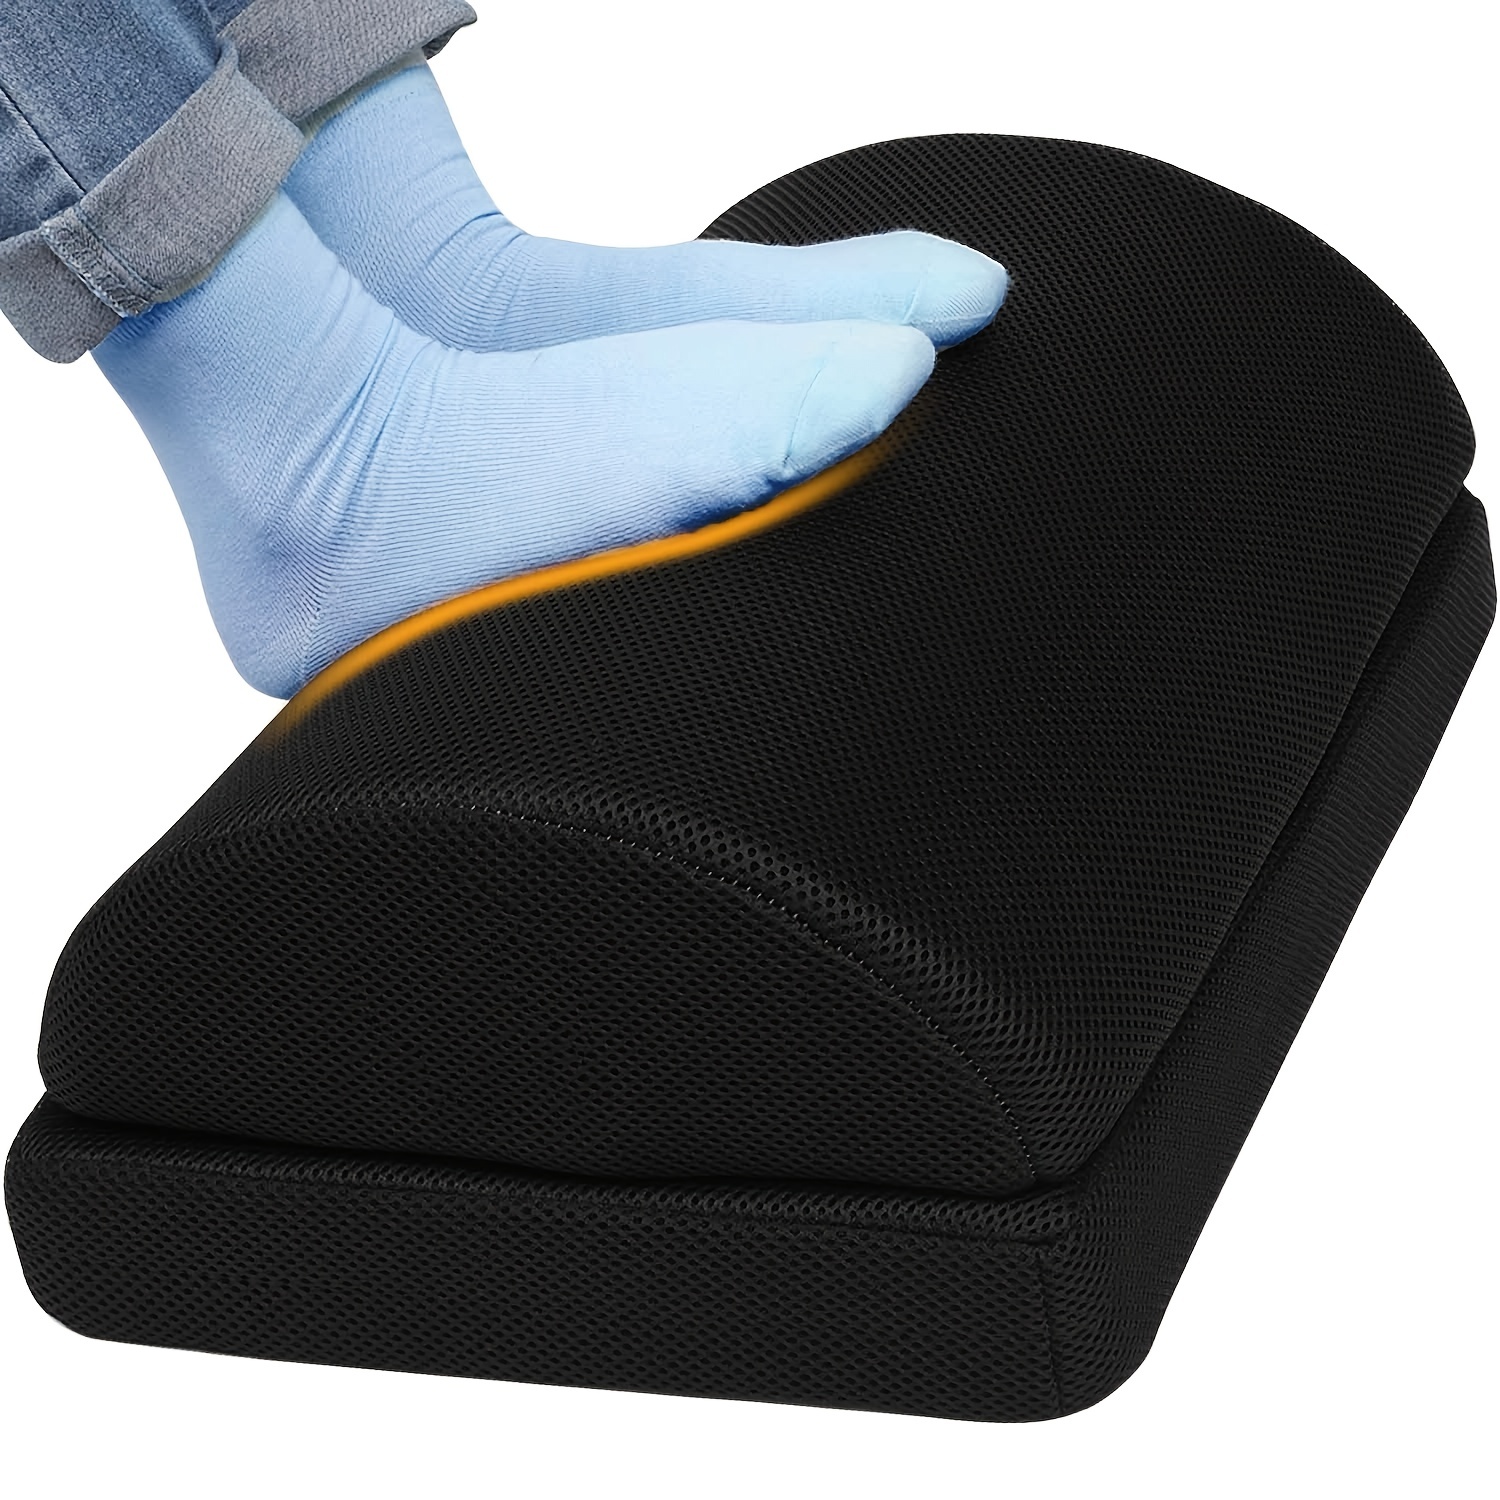 Footrest - Foot Rest for Under Desk at Work - Memory Foam Foot Stool with 2  Adjustable Height for Office Gaming & Computer Chairs - Comfortable